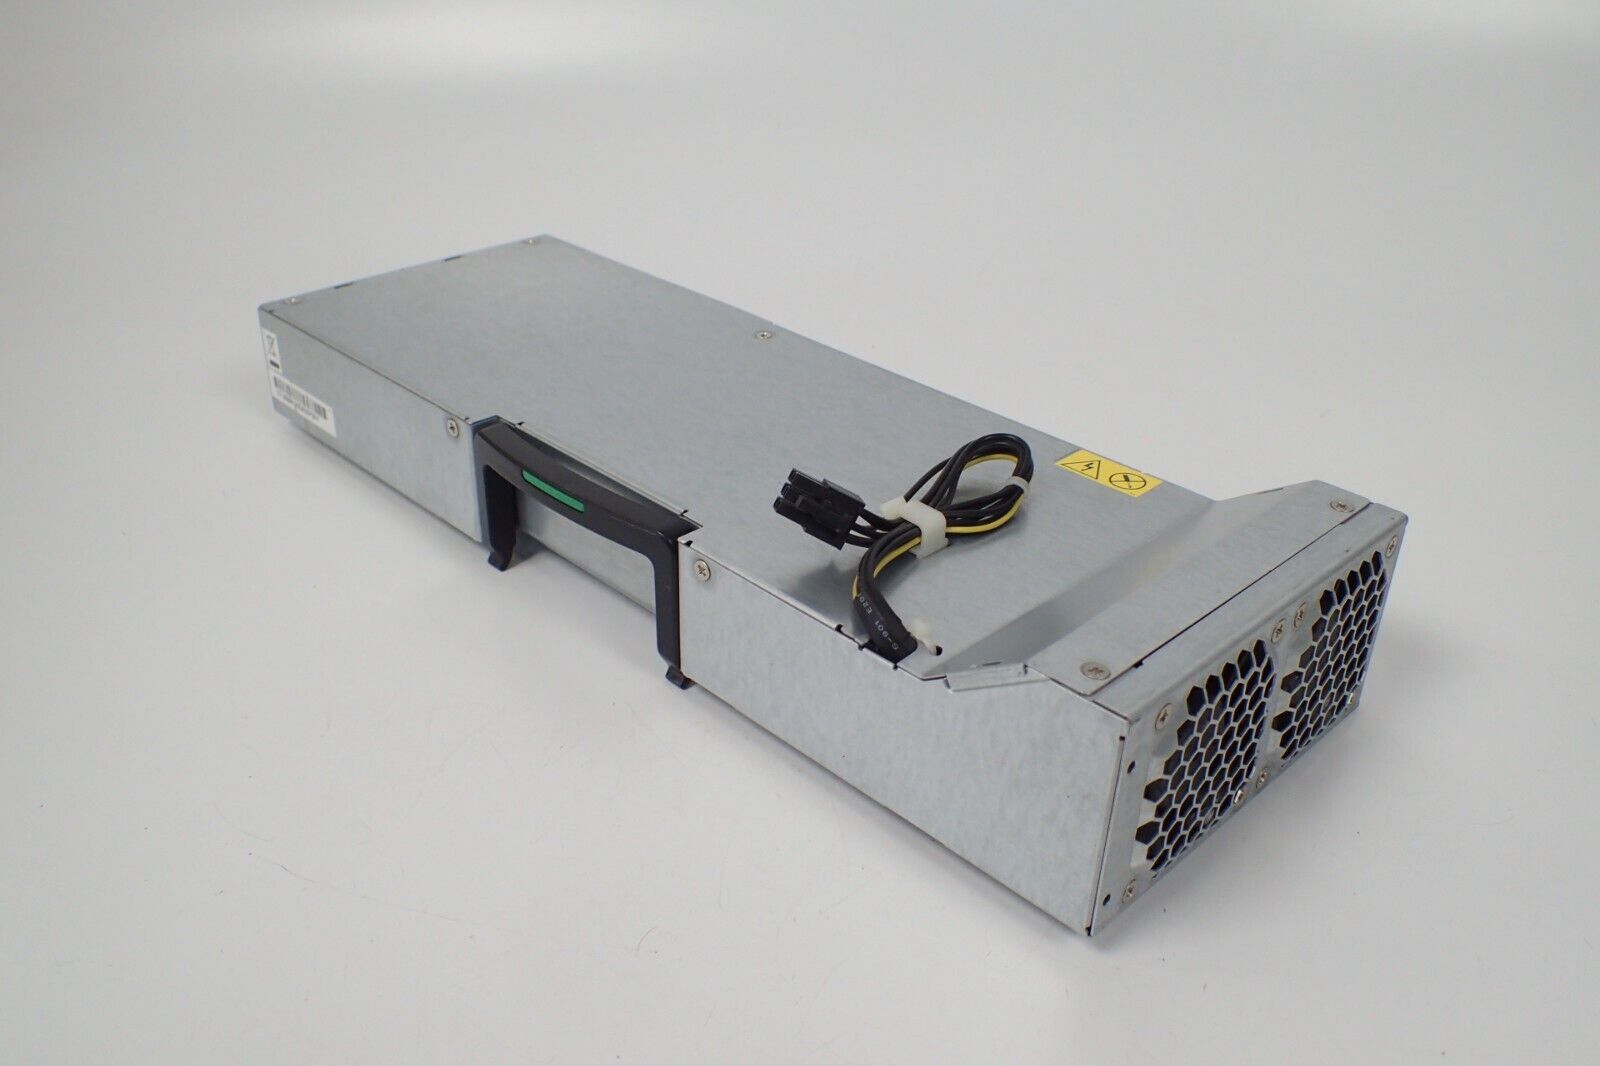 HP DPS-850GB A 850W Power Supply for HP Z820 632913-001 623195-001